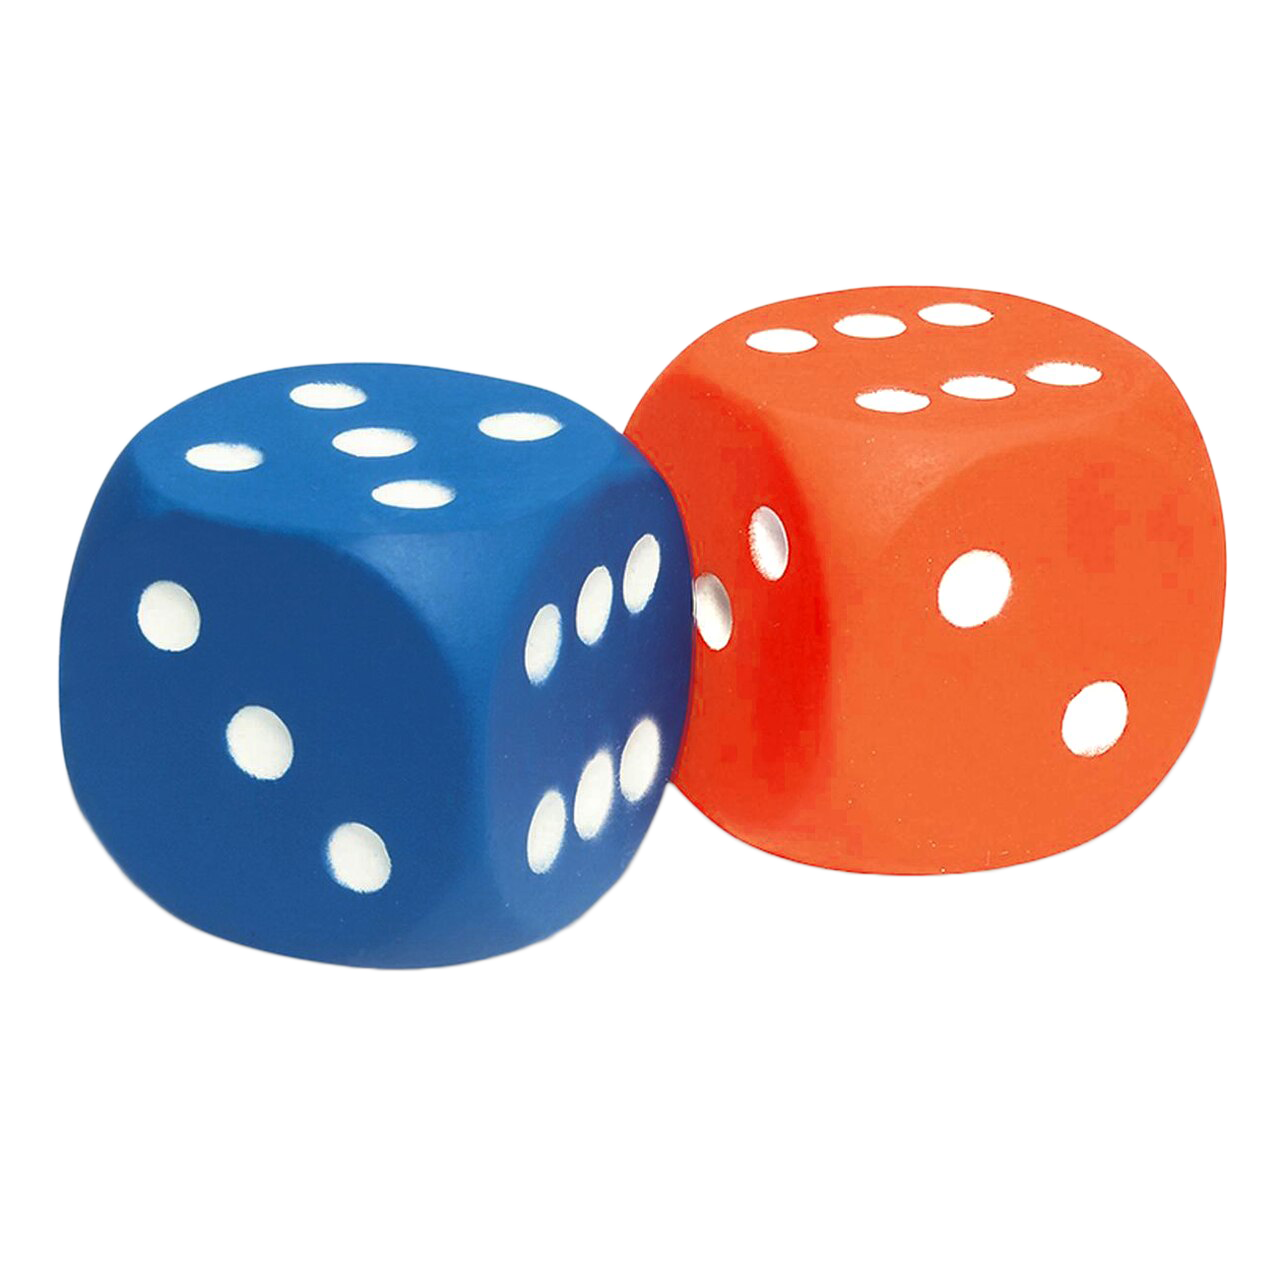 Giant Dice (Colors May Vary)